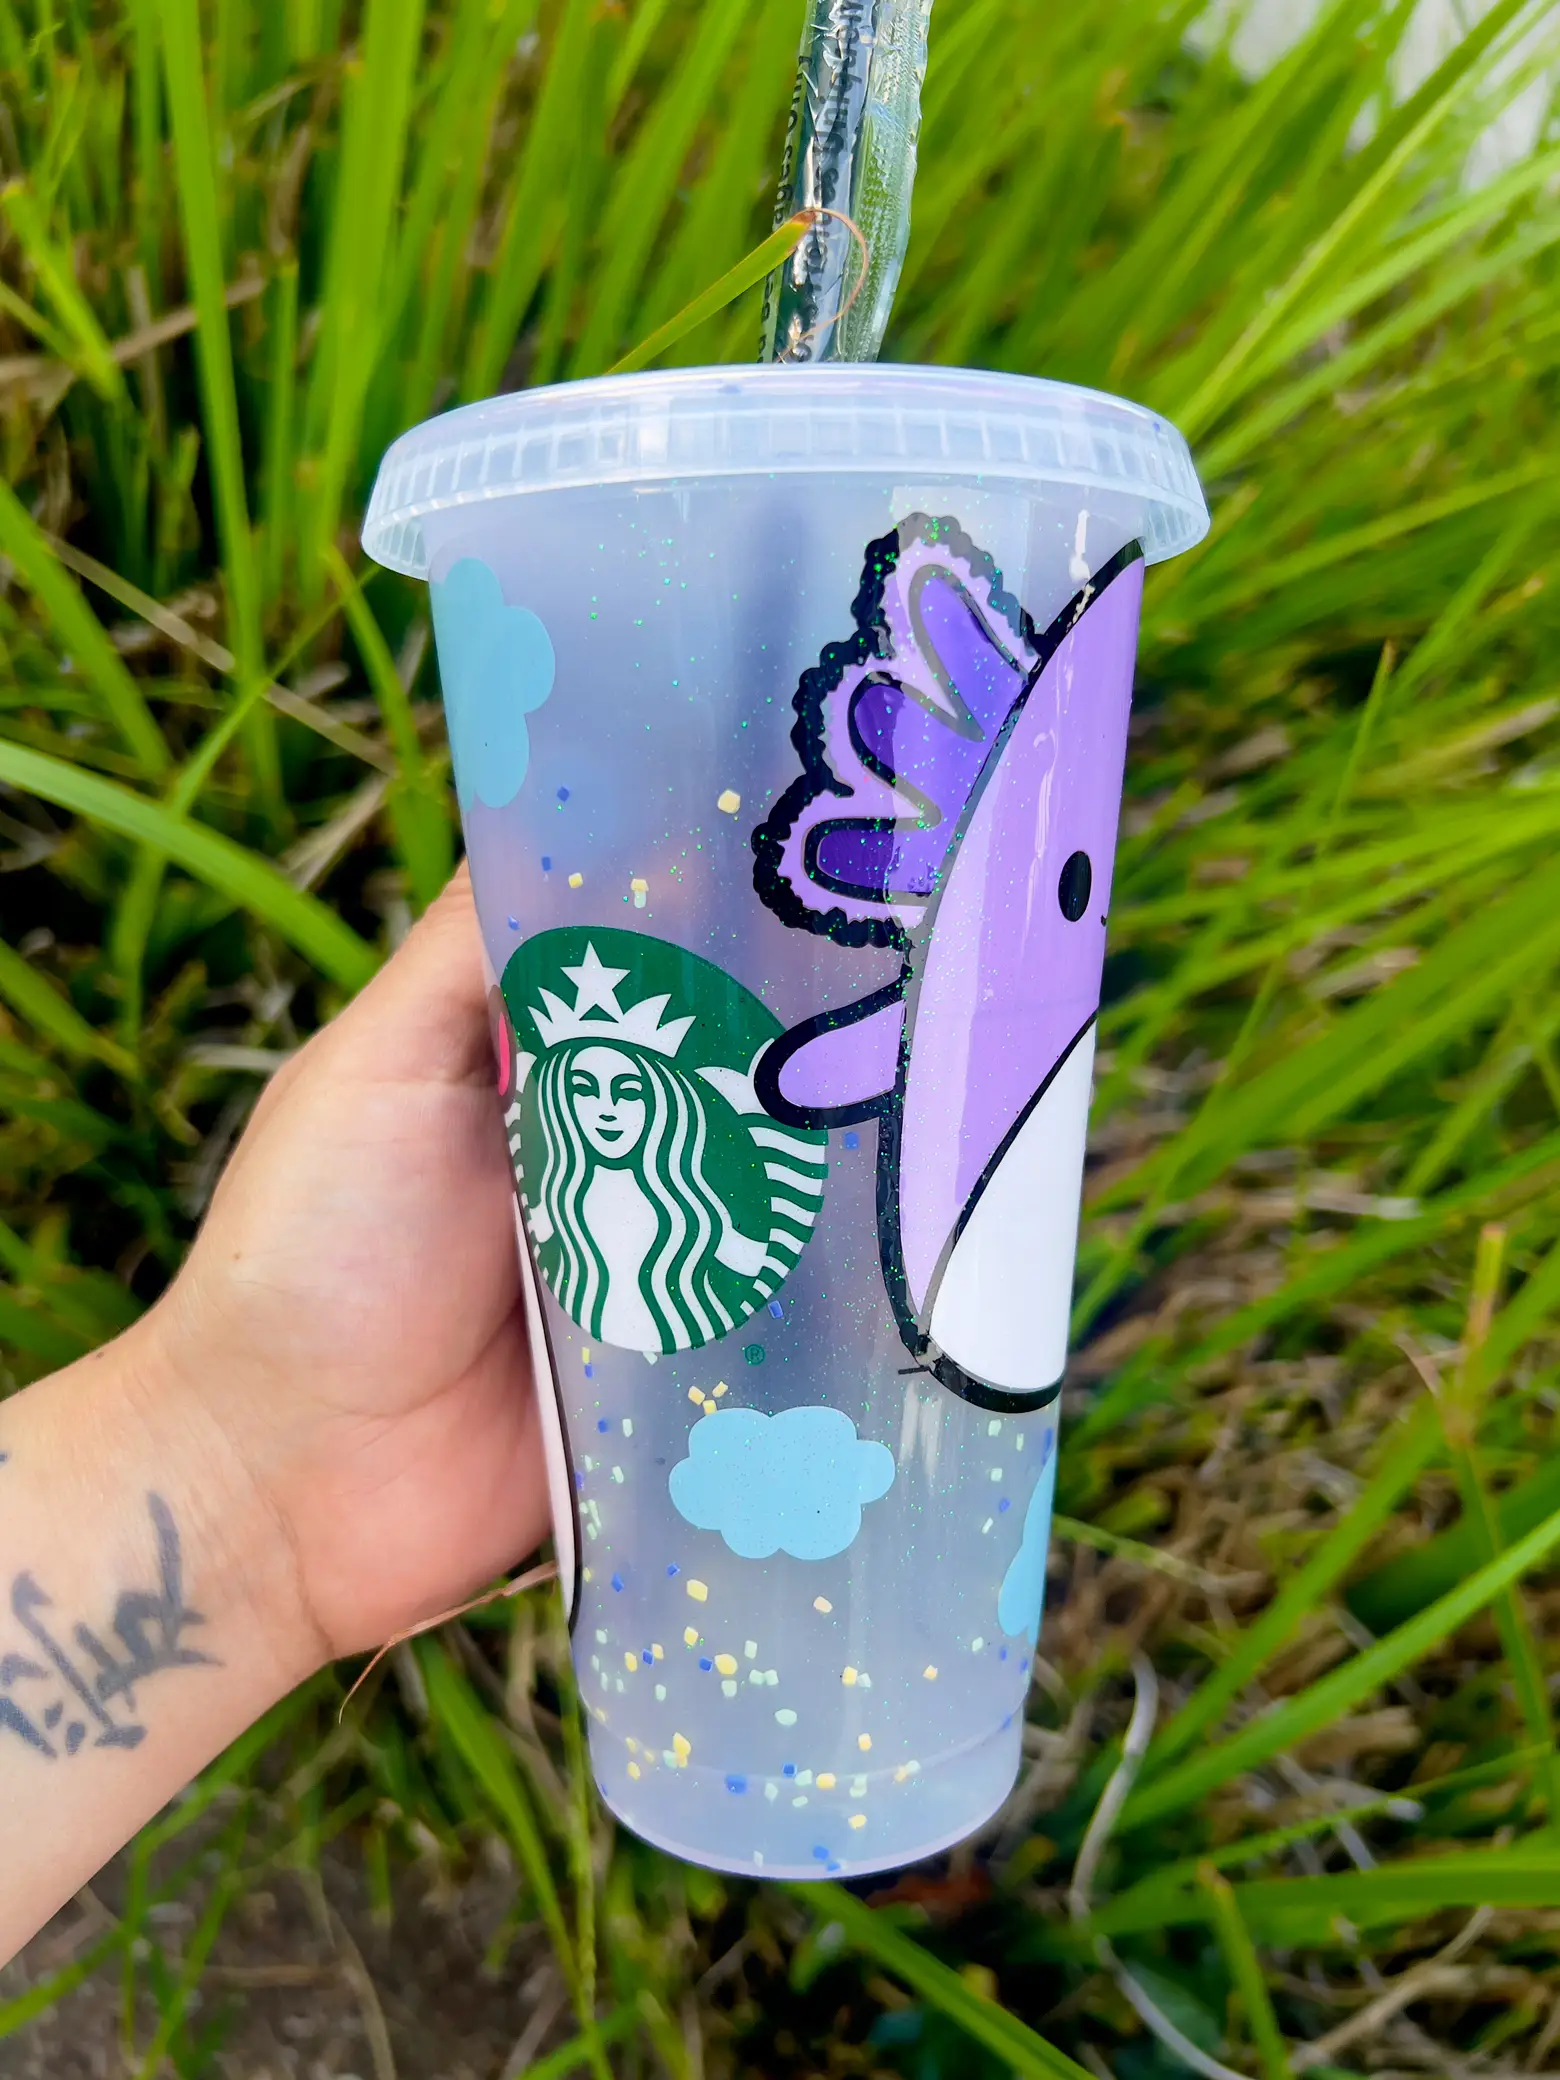 Caedyn Squishmallow Starbucks Cold Cup